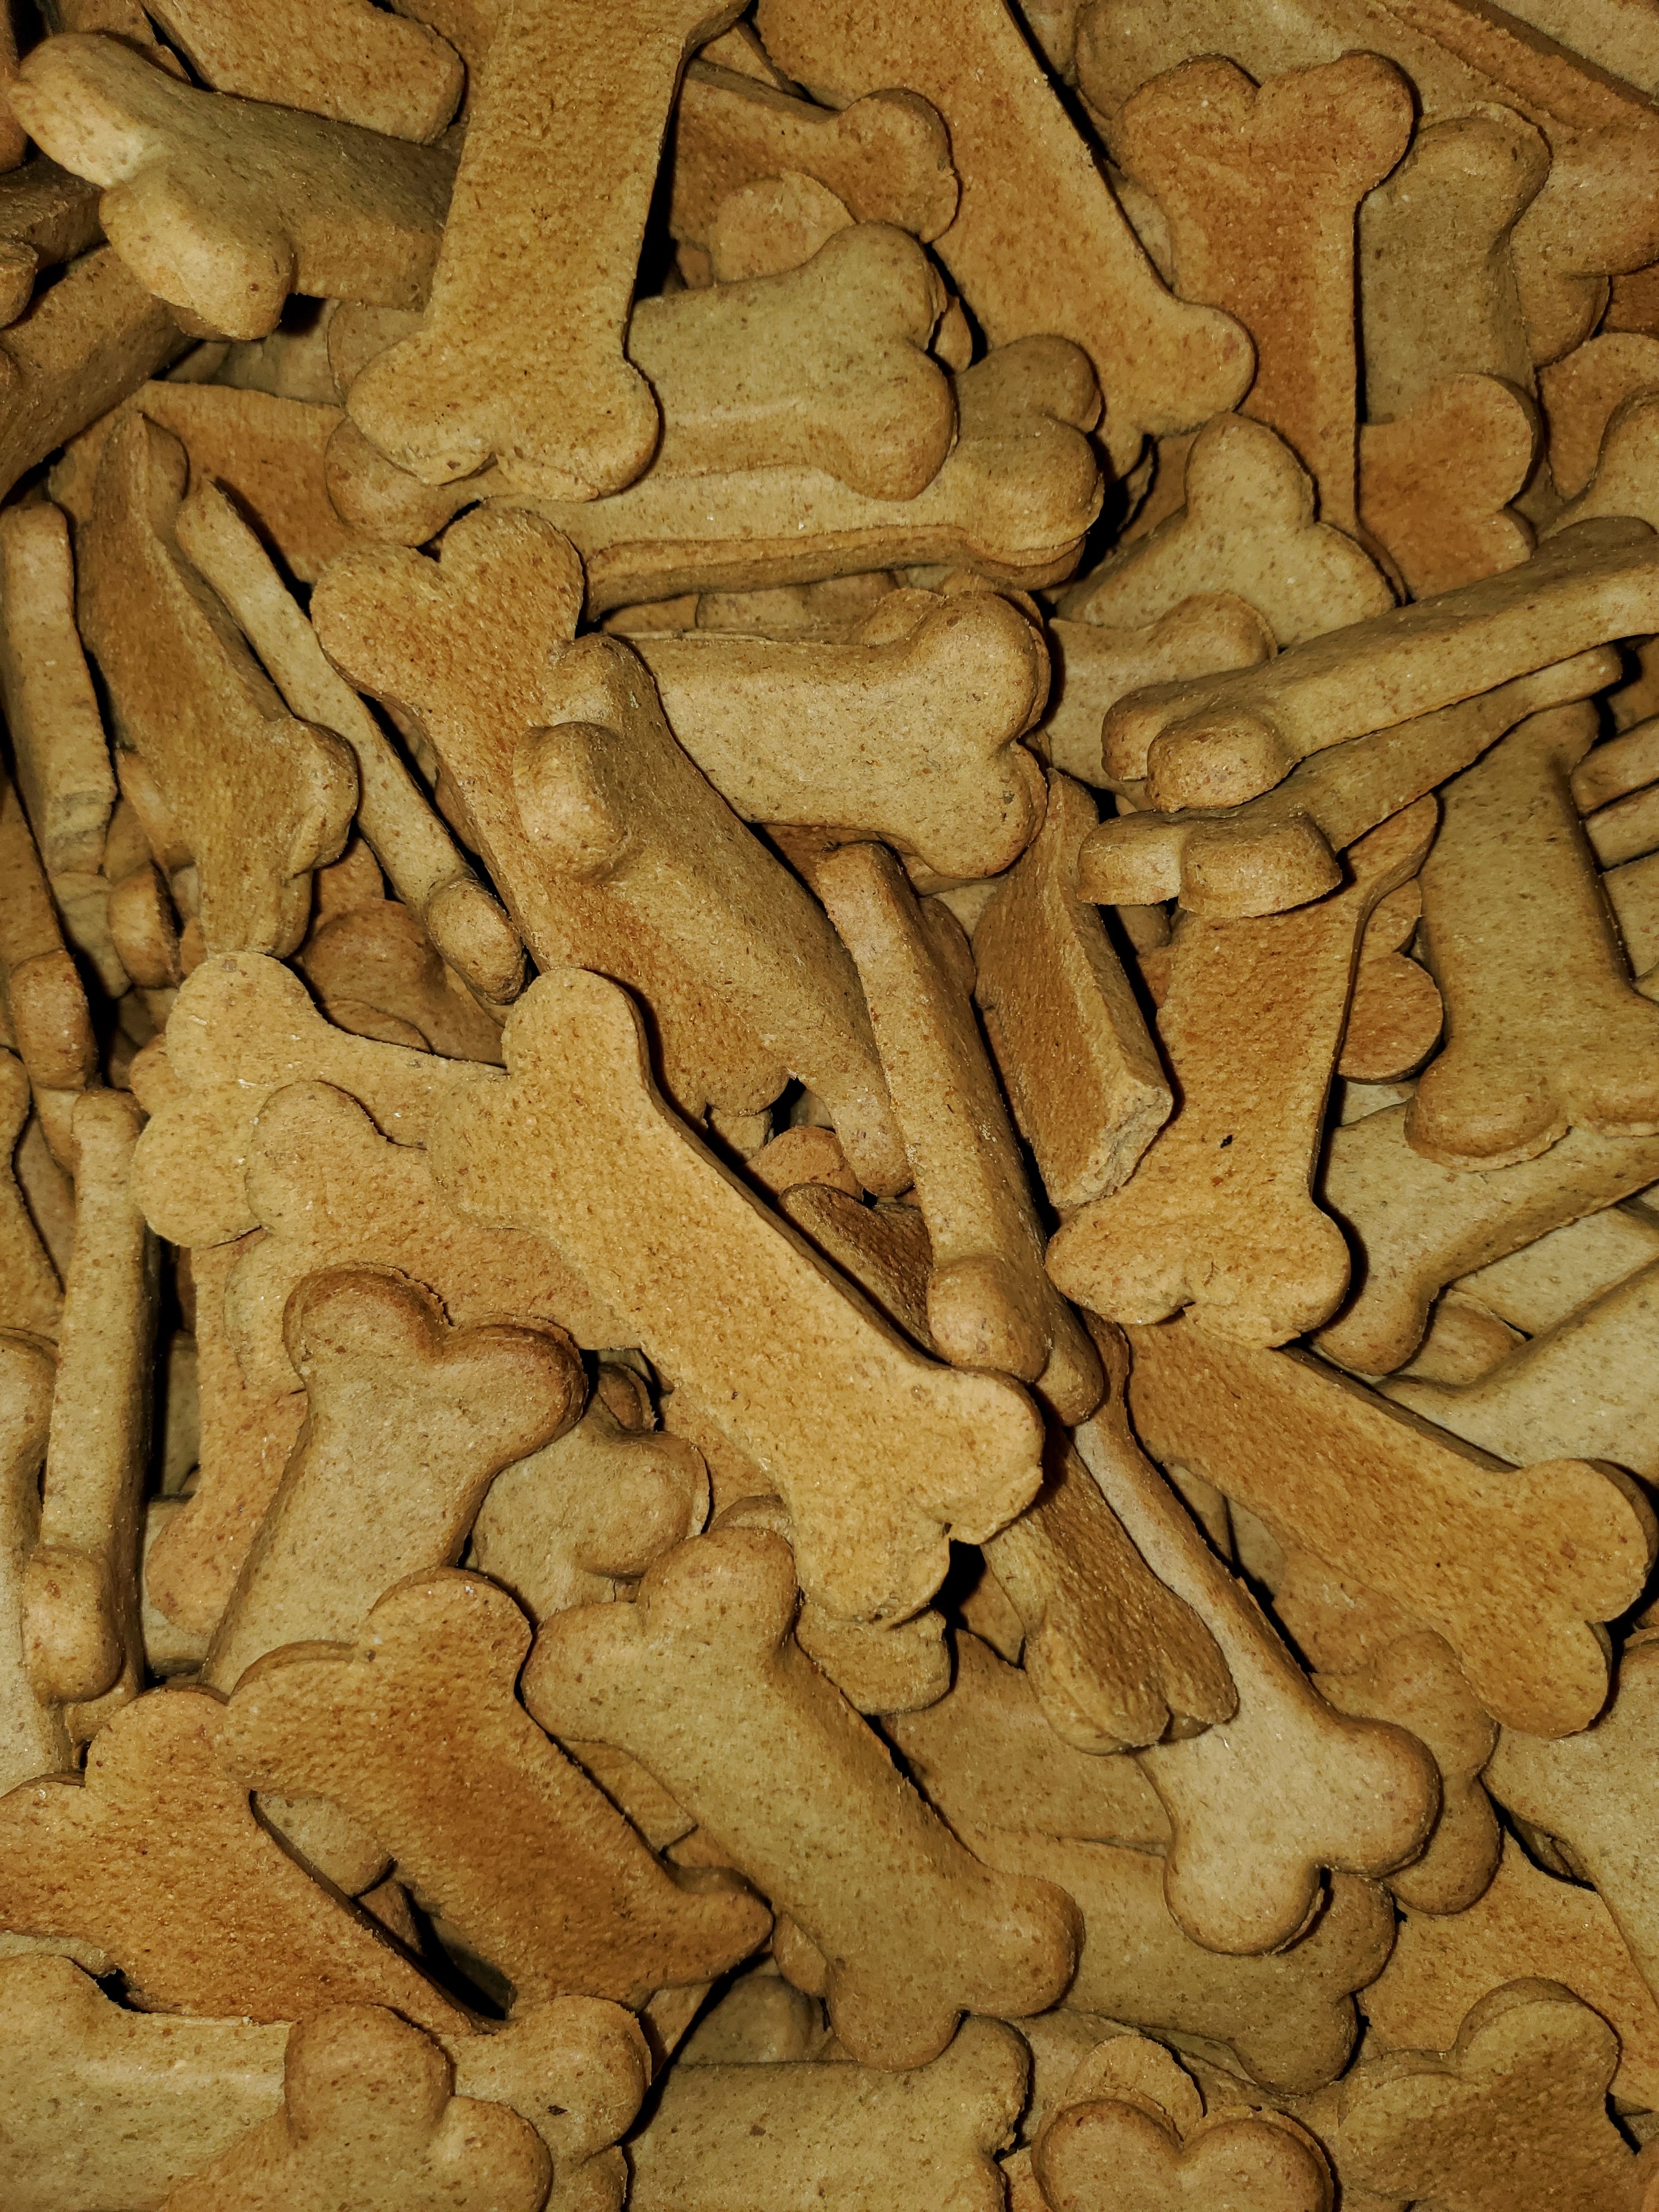 Oat, Apple & Cinnamon Dog biscuits by the pound